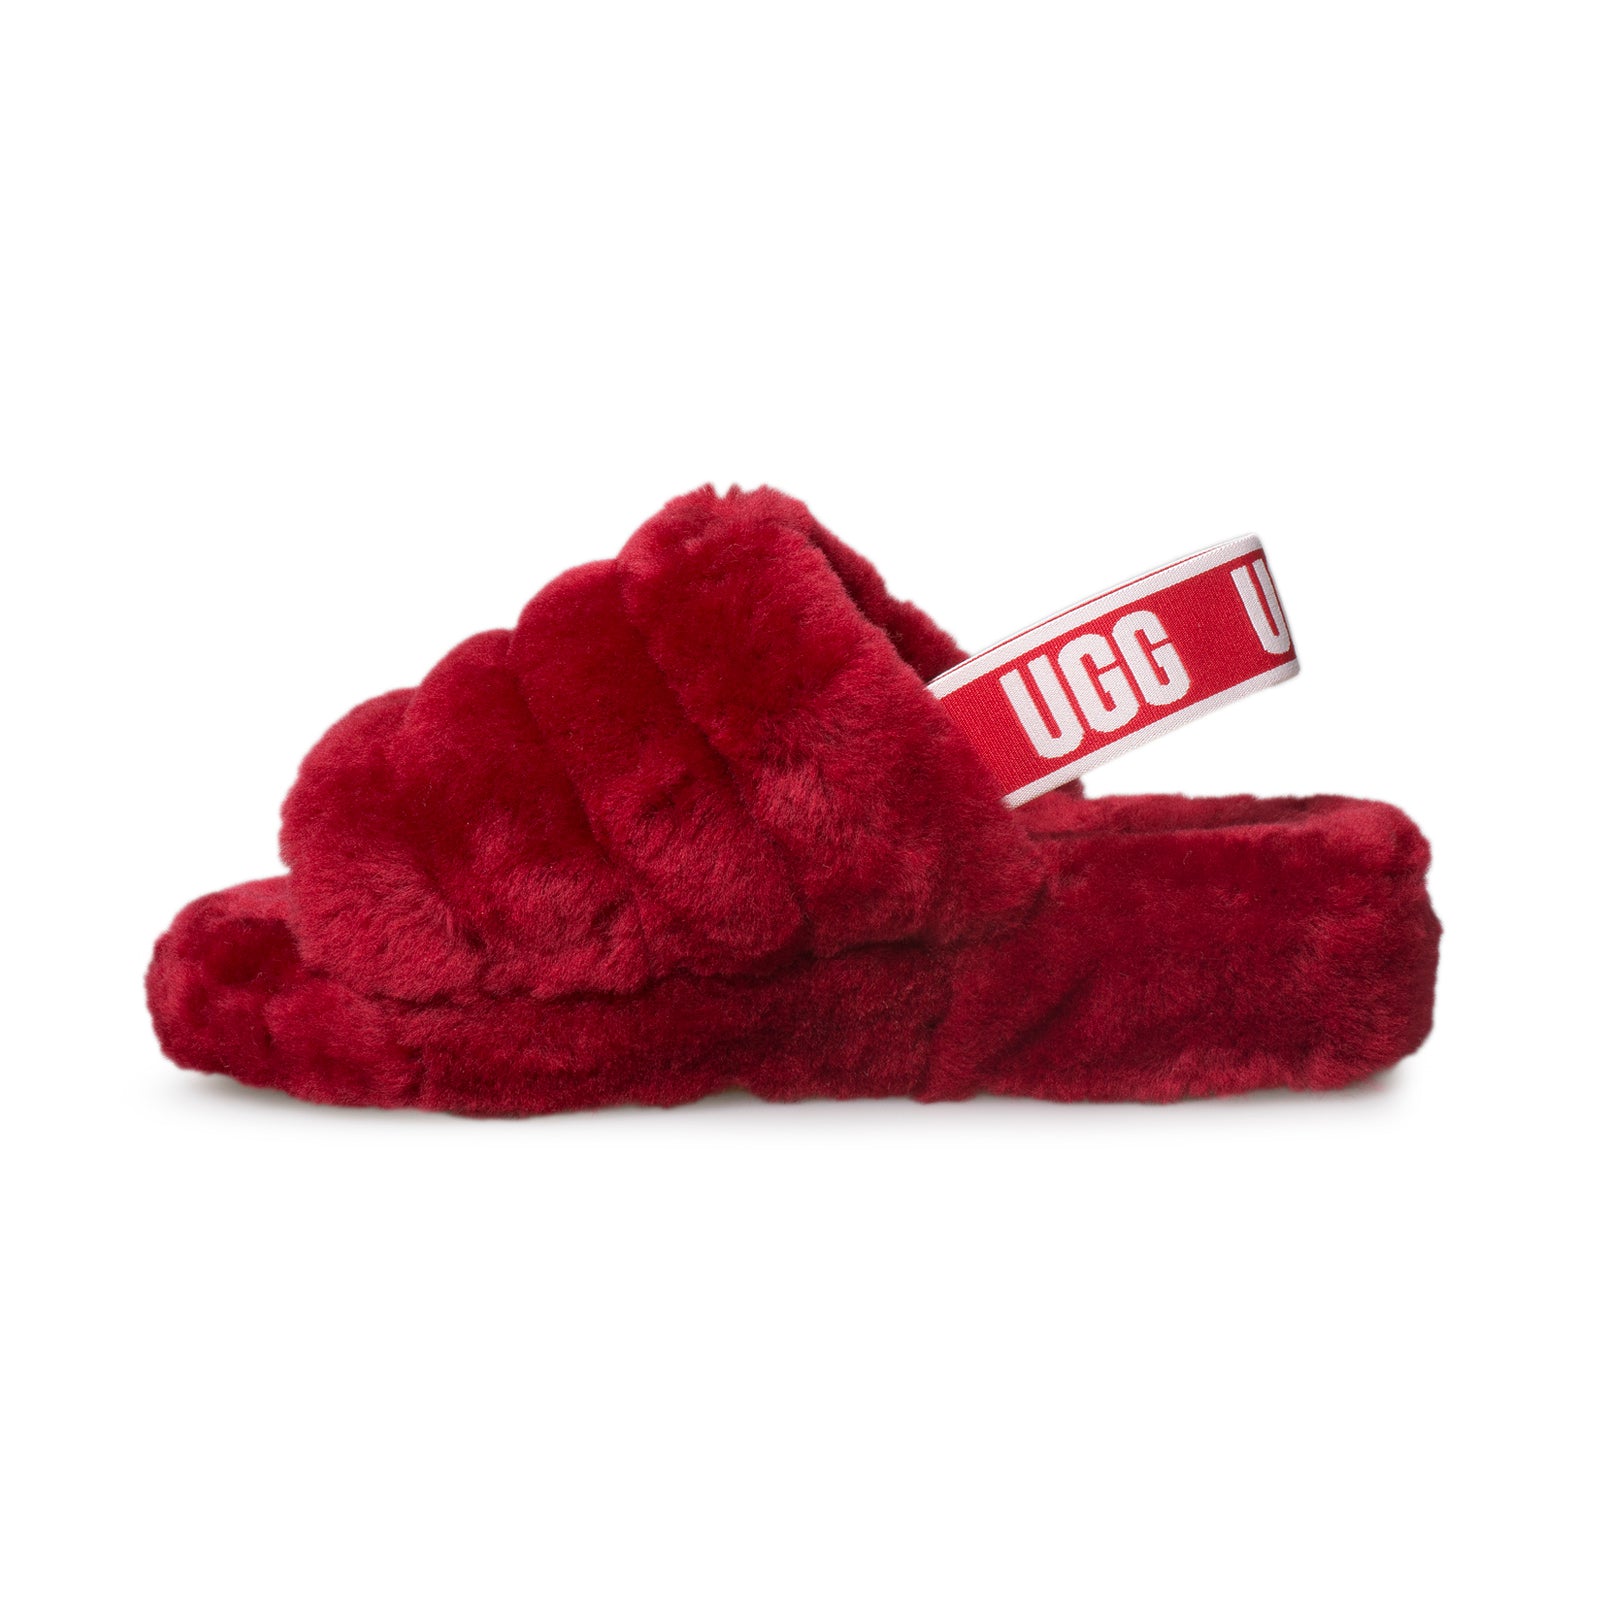 UGG Fluff Yeah Slide Ribbon Red Slippers - Women's - MyCozyBoots